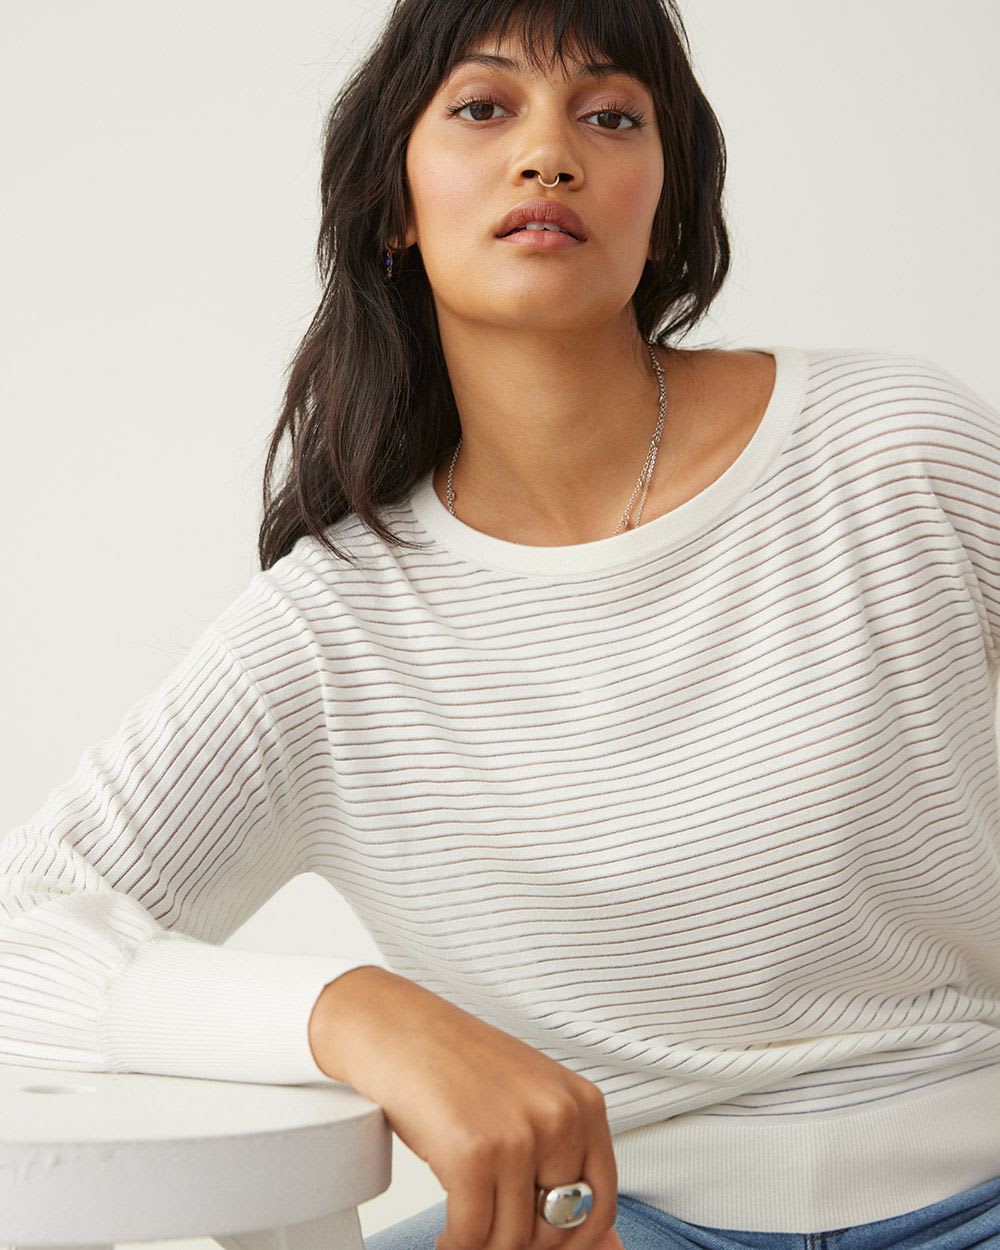 Long-Sleeve Boxy Pullover with Boat Neckline